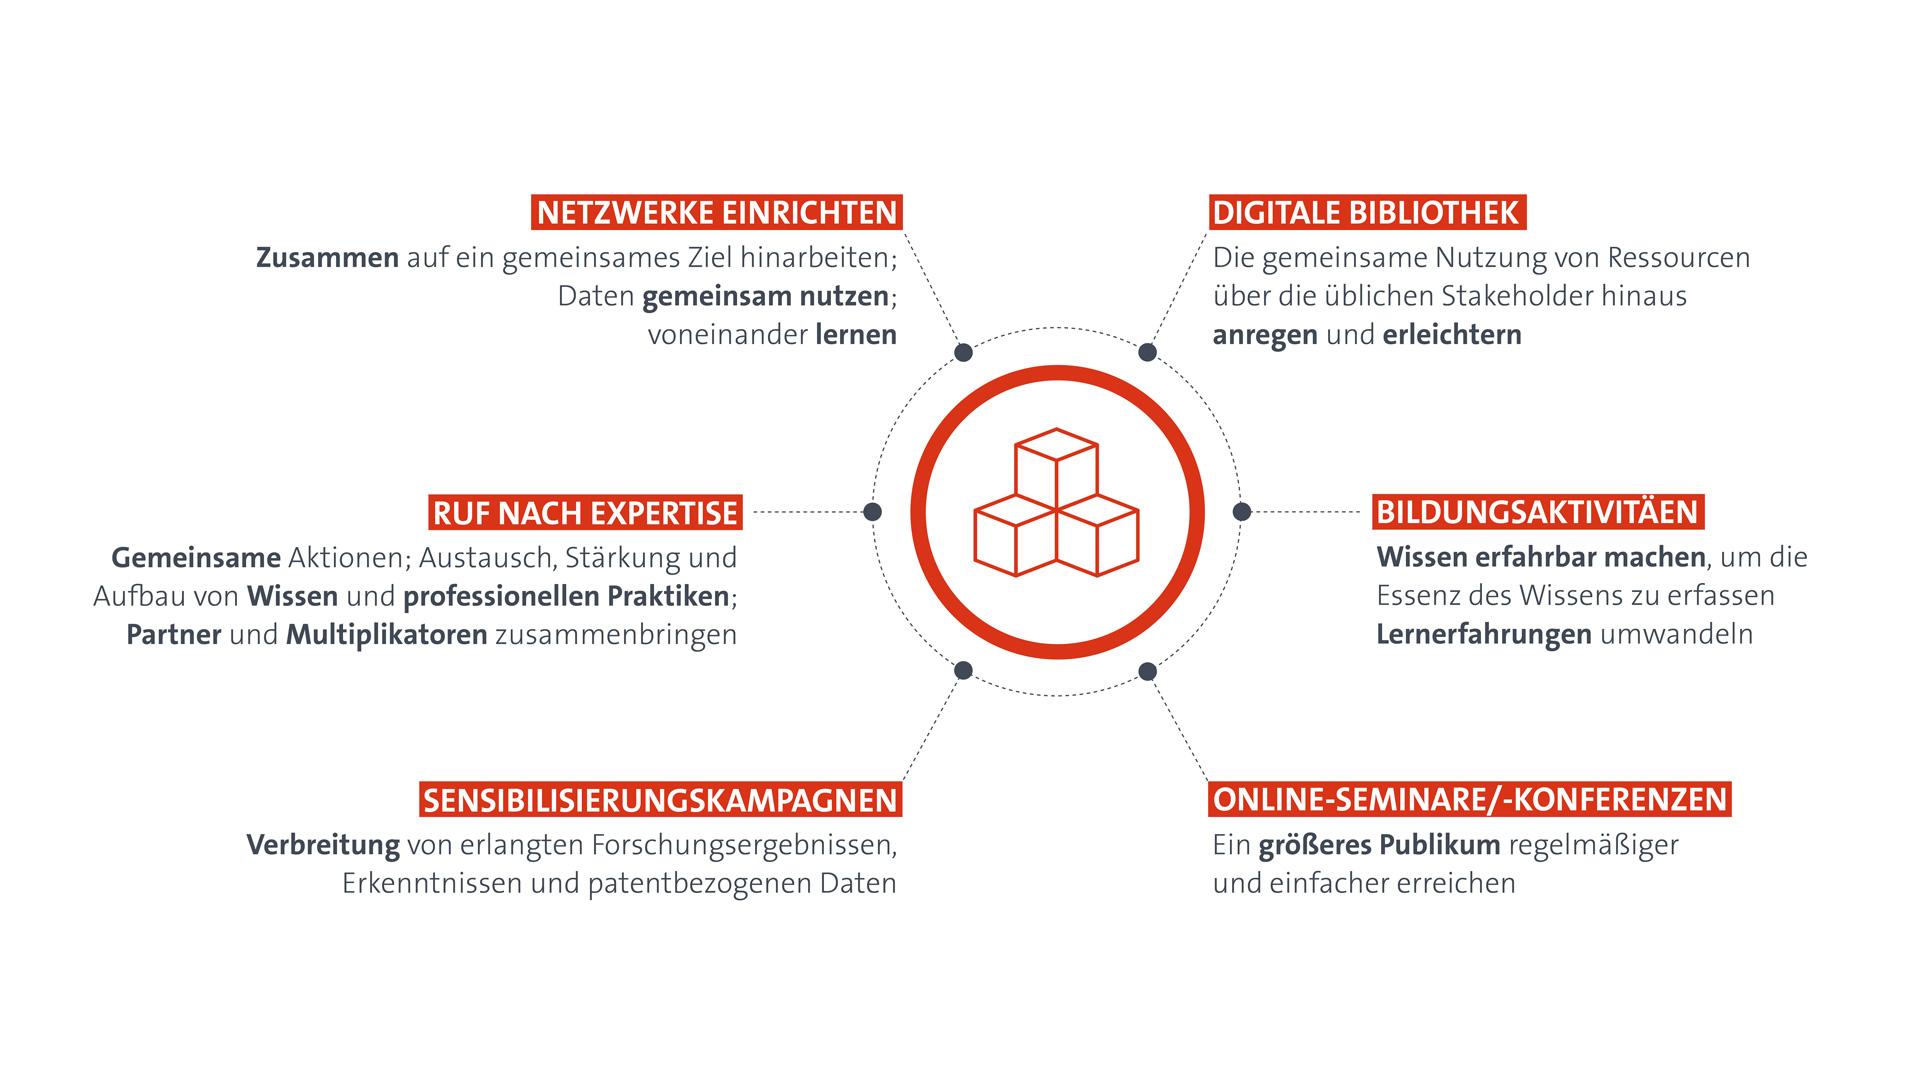 Infographic showing three building blocks in the center of a circle, surrounded by six categories: Set of networks, Digital library, Educational activities, e-seminars/e-conferences, awareness campaigns, calls for expertise